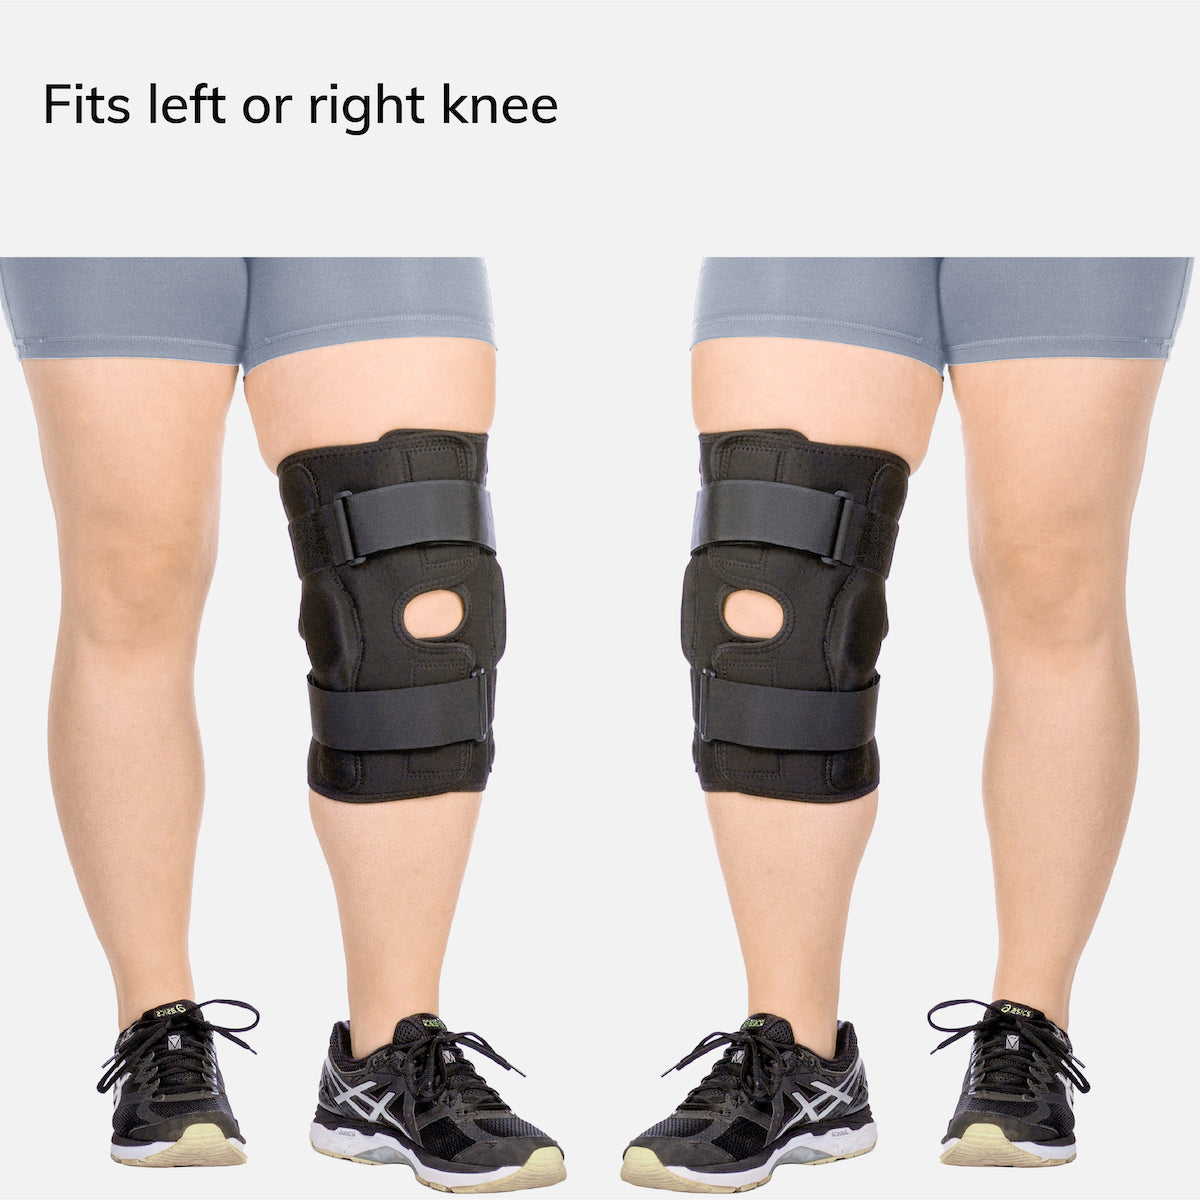 you can wear the medical knee brace on either leg